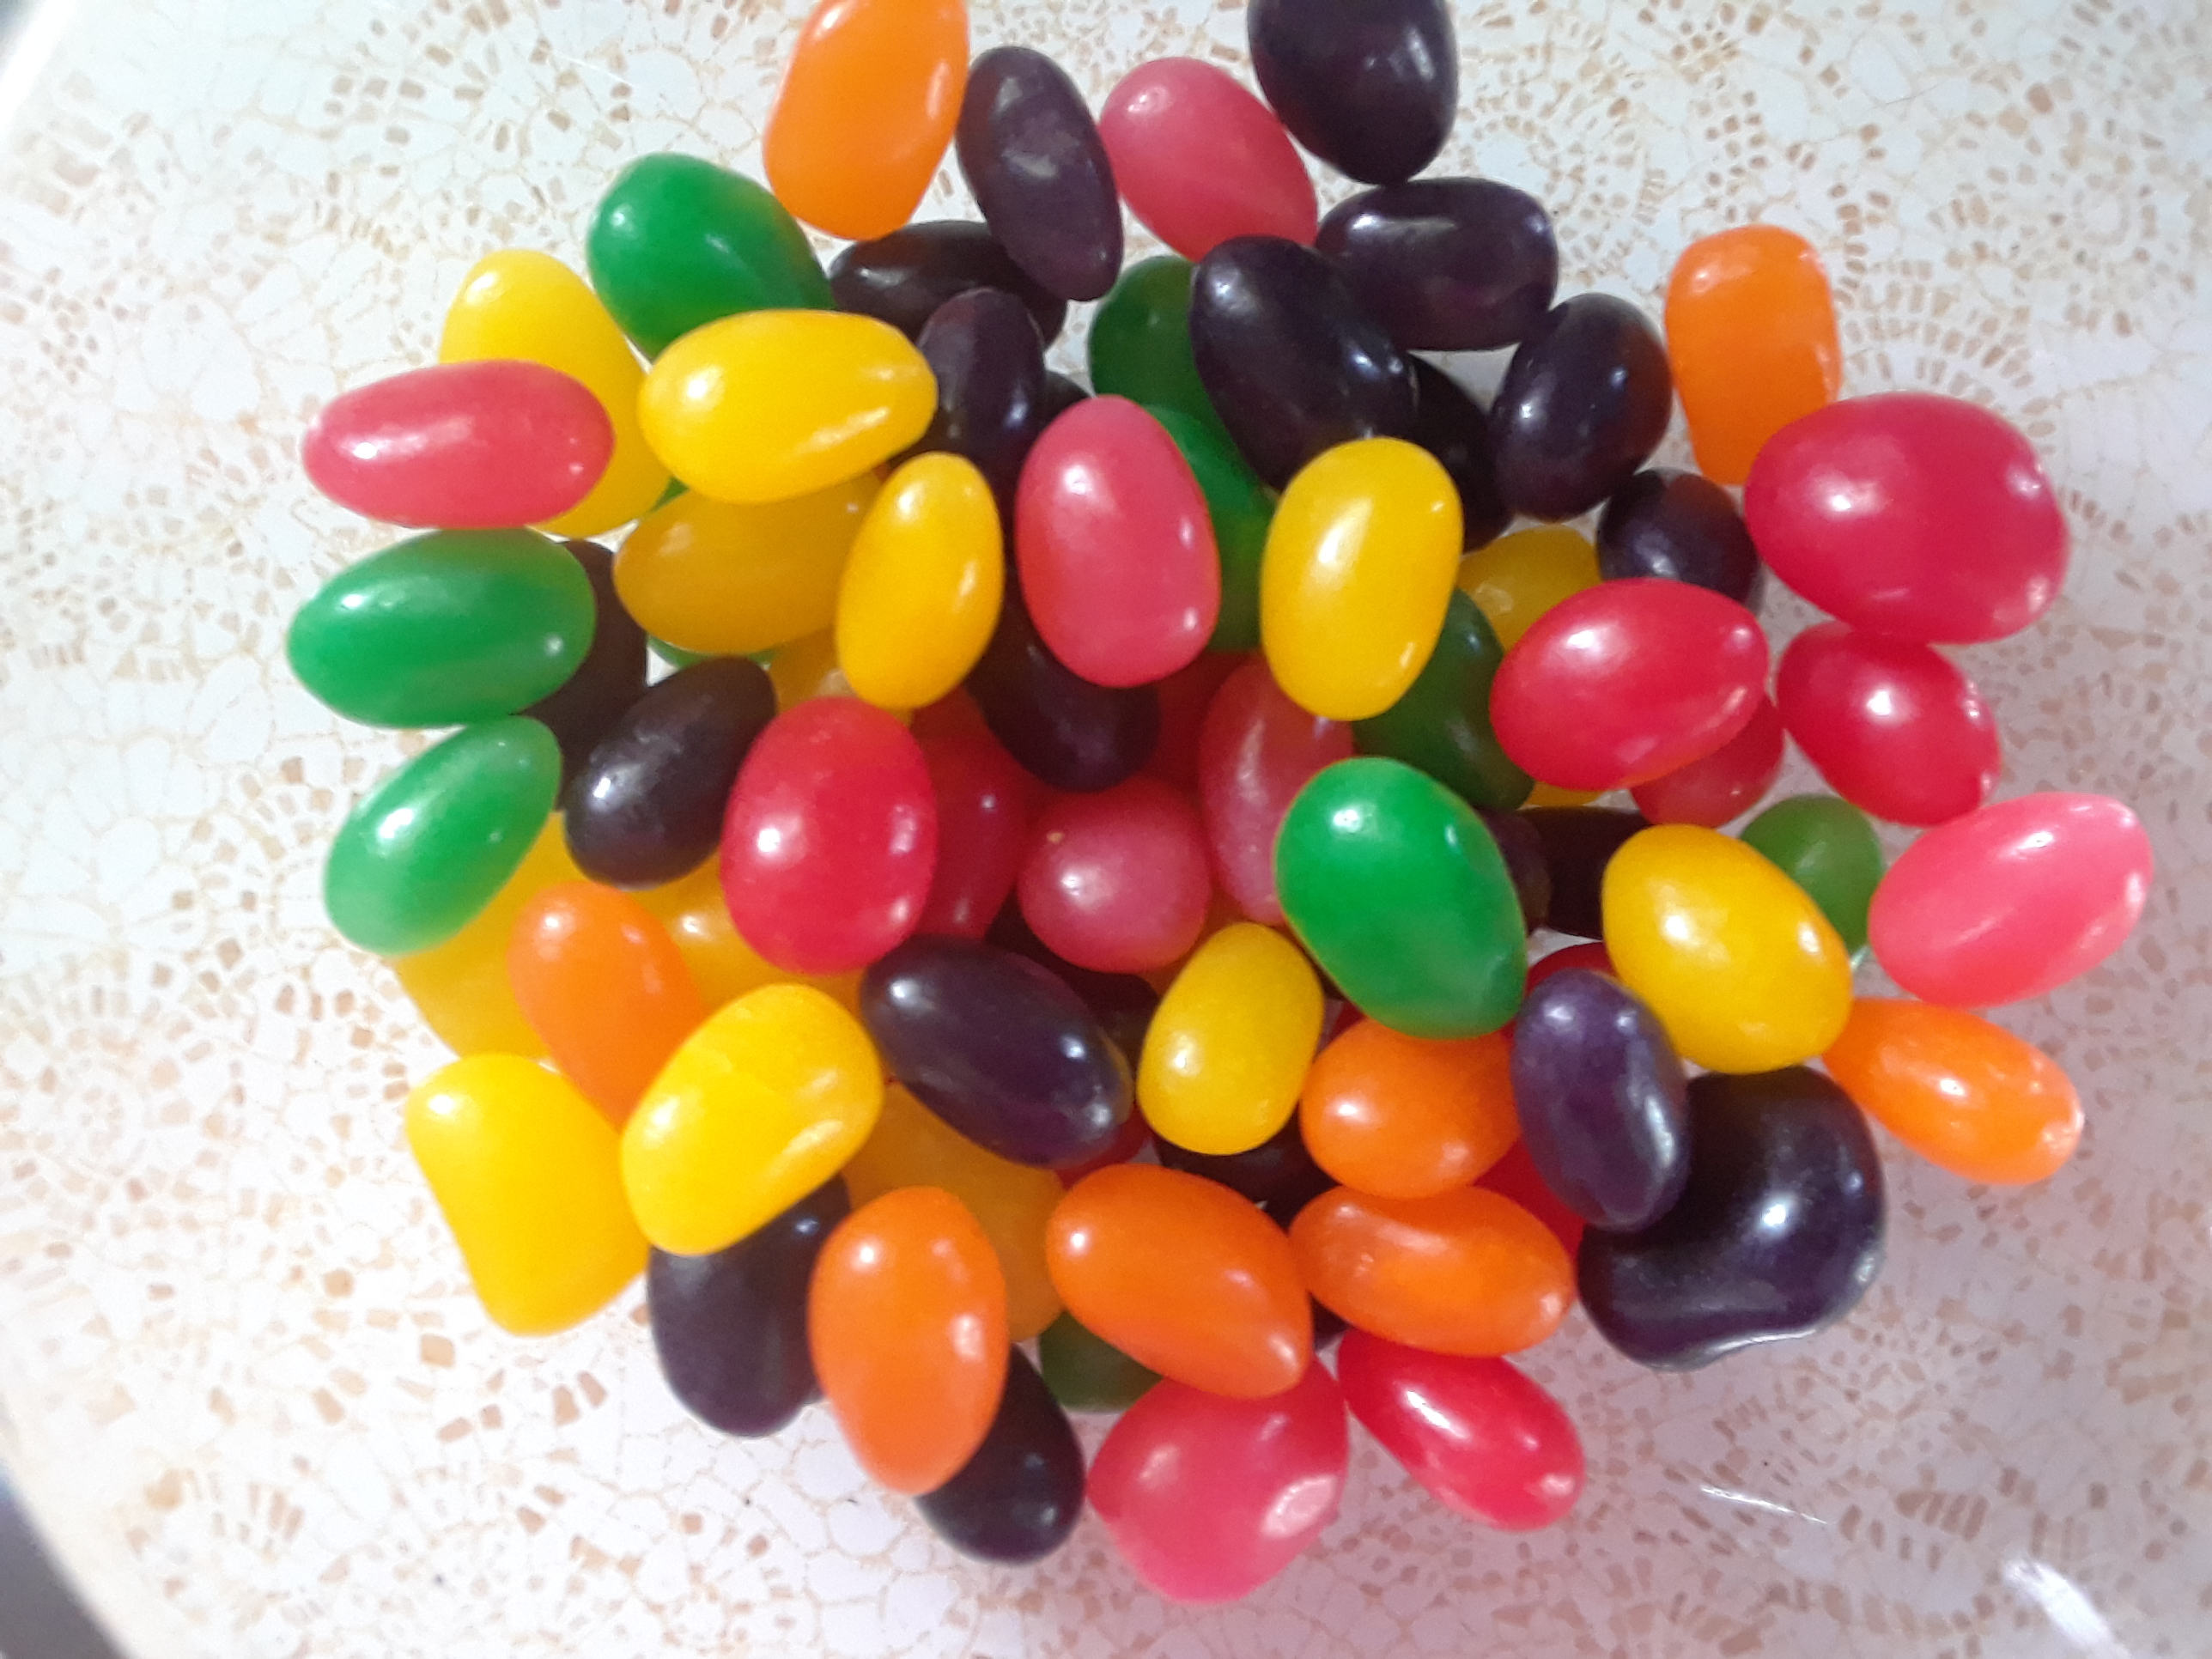 Jelly beans sitting on a plate.